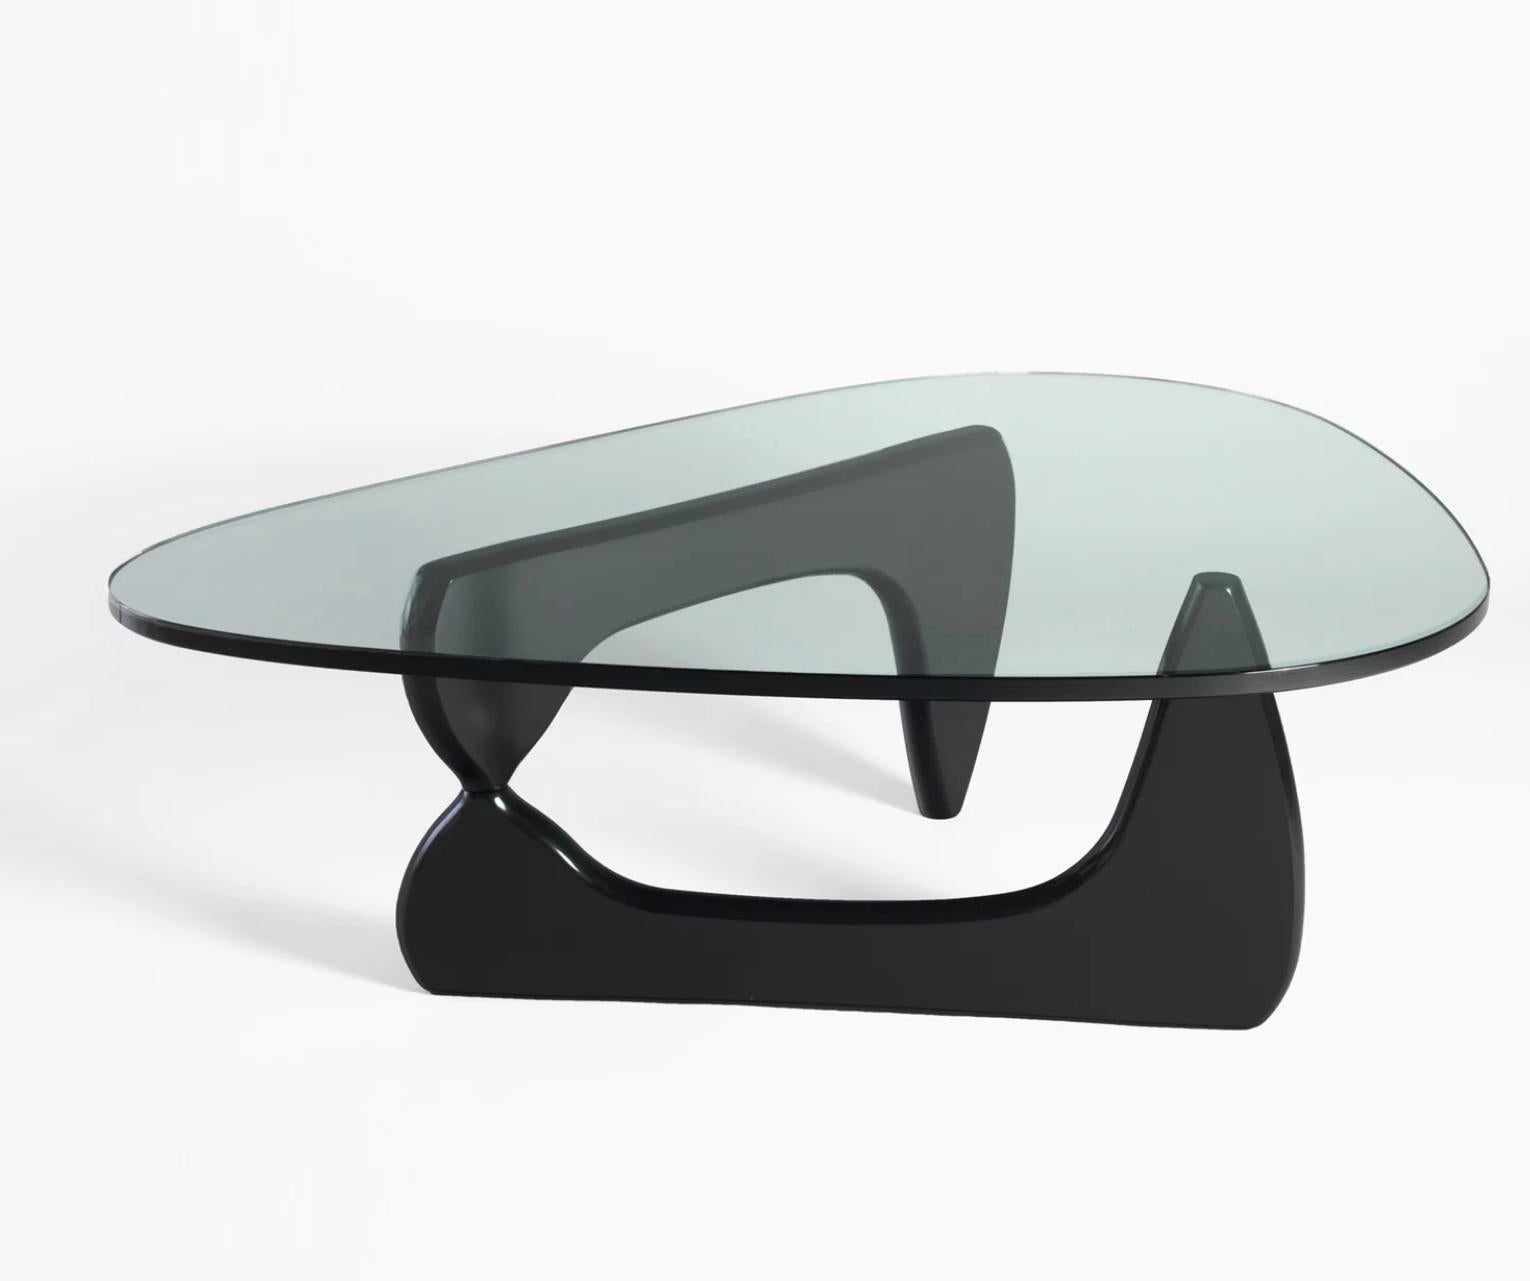 This classic table authorized by the Isamu Noguchi Foundation was originally created in 1944. The brilliantly simple design consists of only three elements, the glass top and two interlocking wood base pieces. The table is an extraordinary harmony